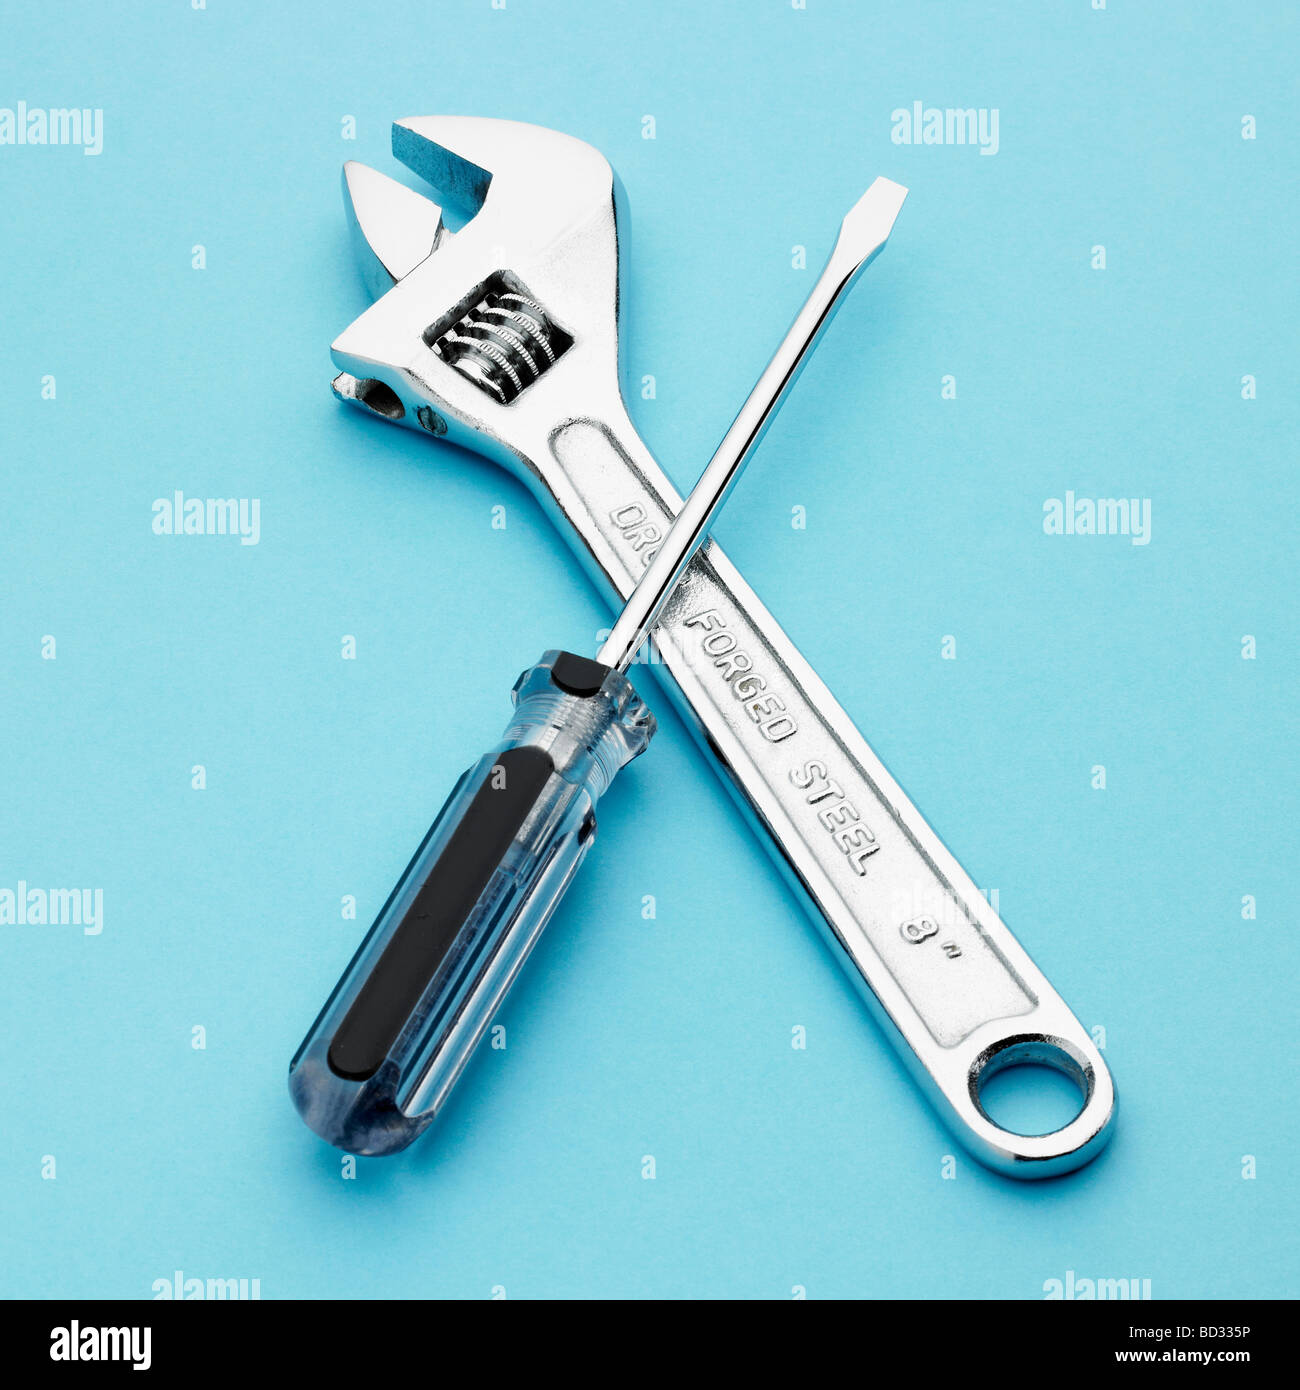 Adjustable spanner and screwdriver on blue background. Stock Photo